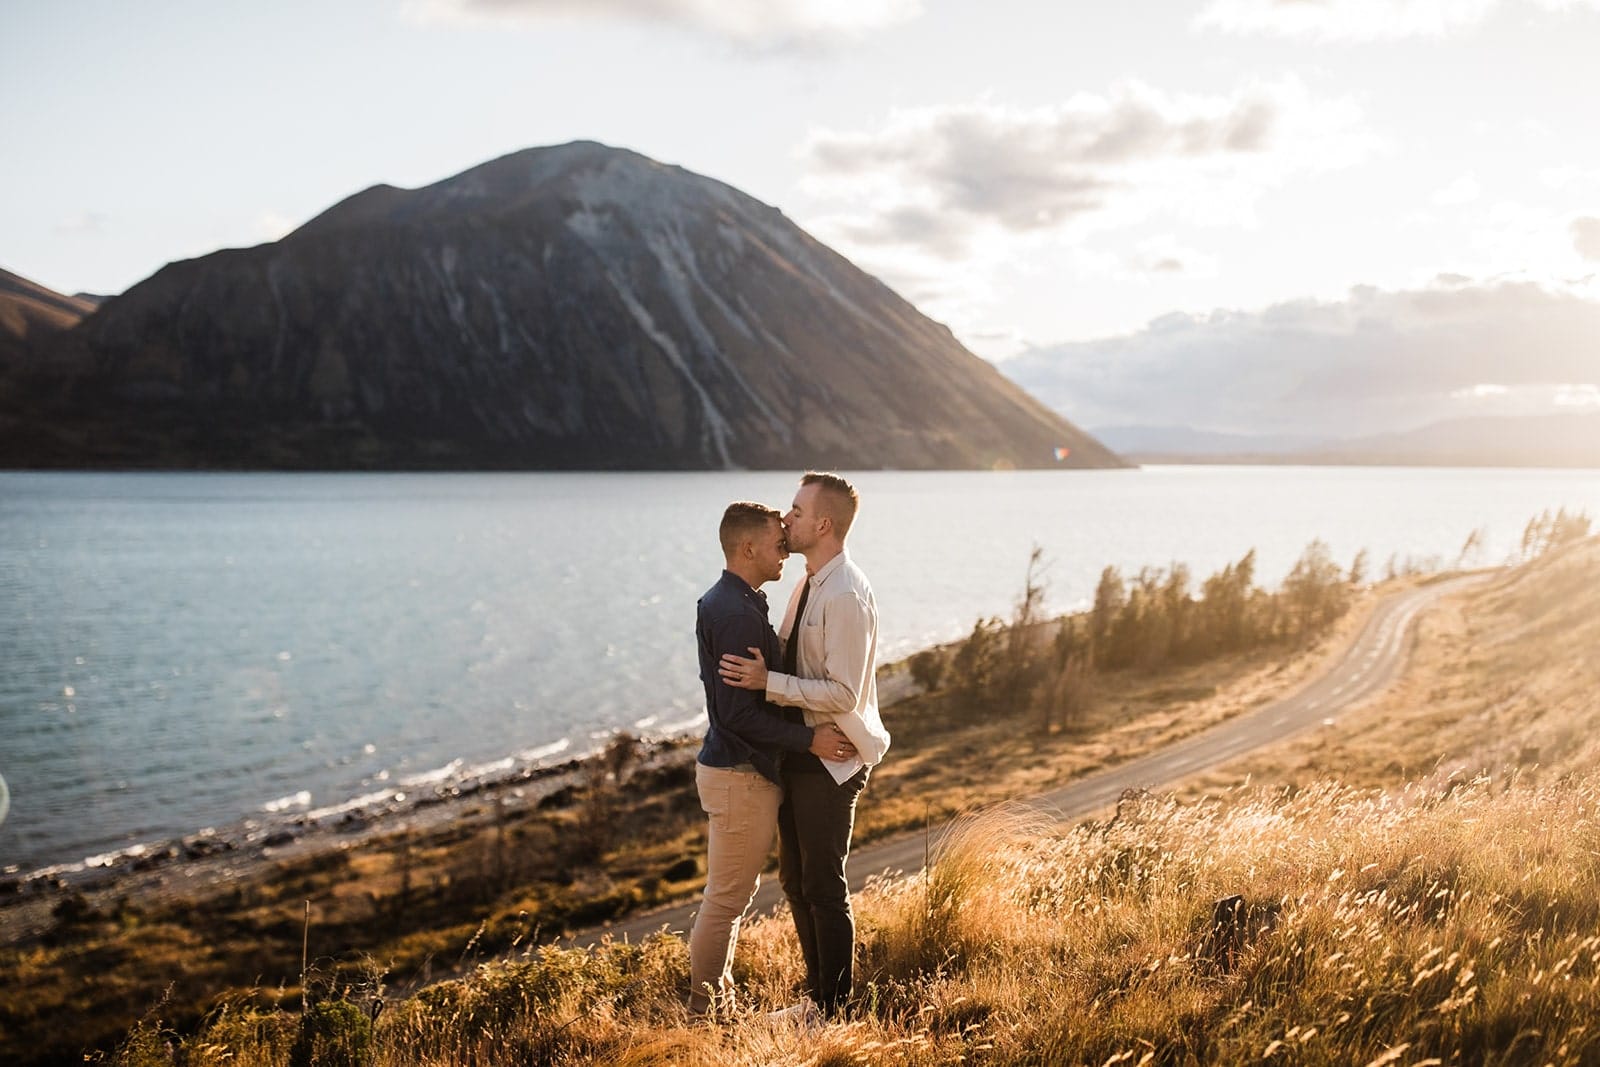 Two men kiss during their adventure photos in New Zealand